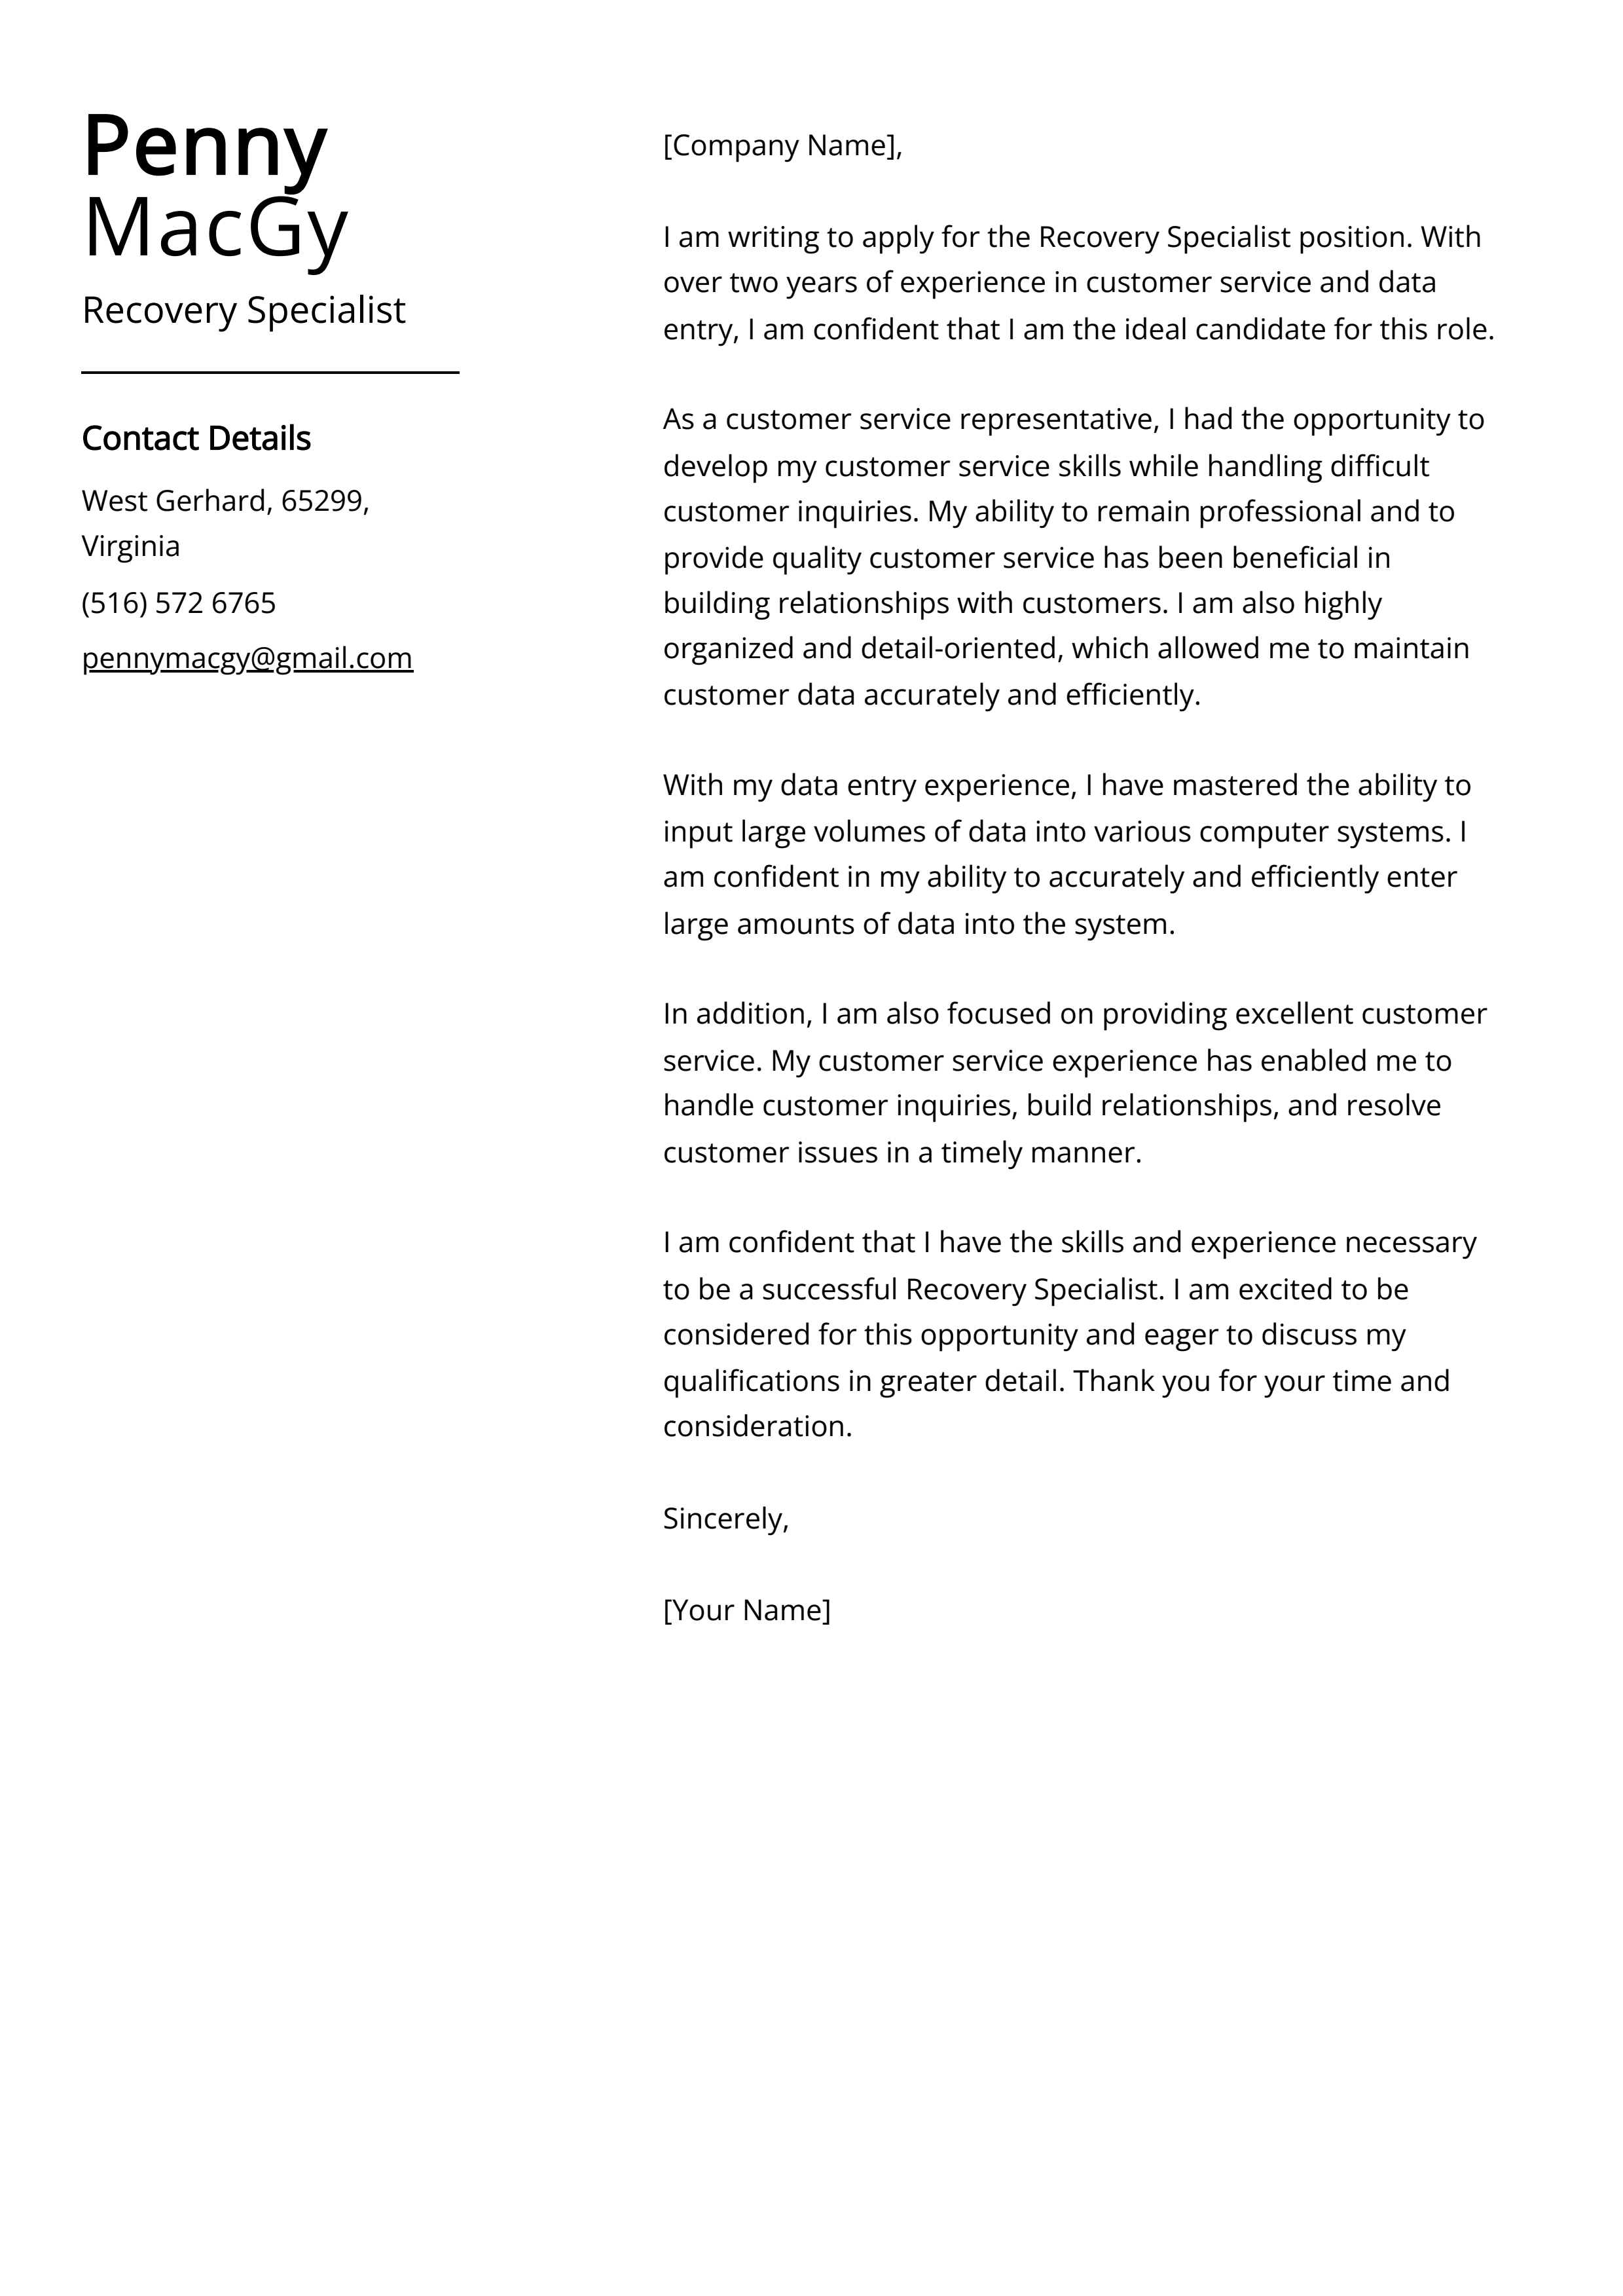 Recovery Specialist Cover Letter Example